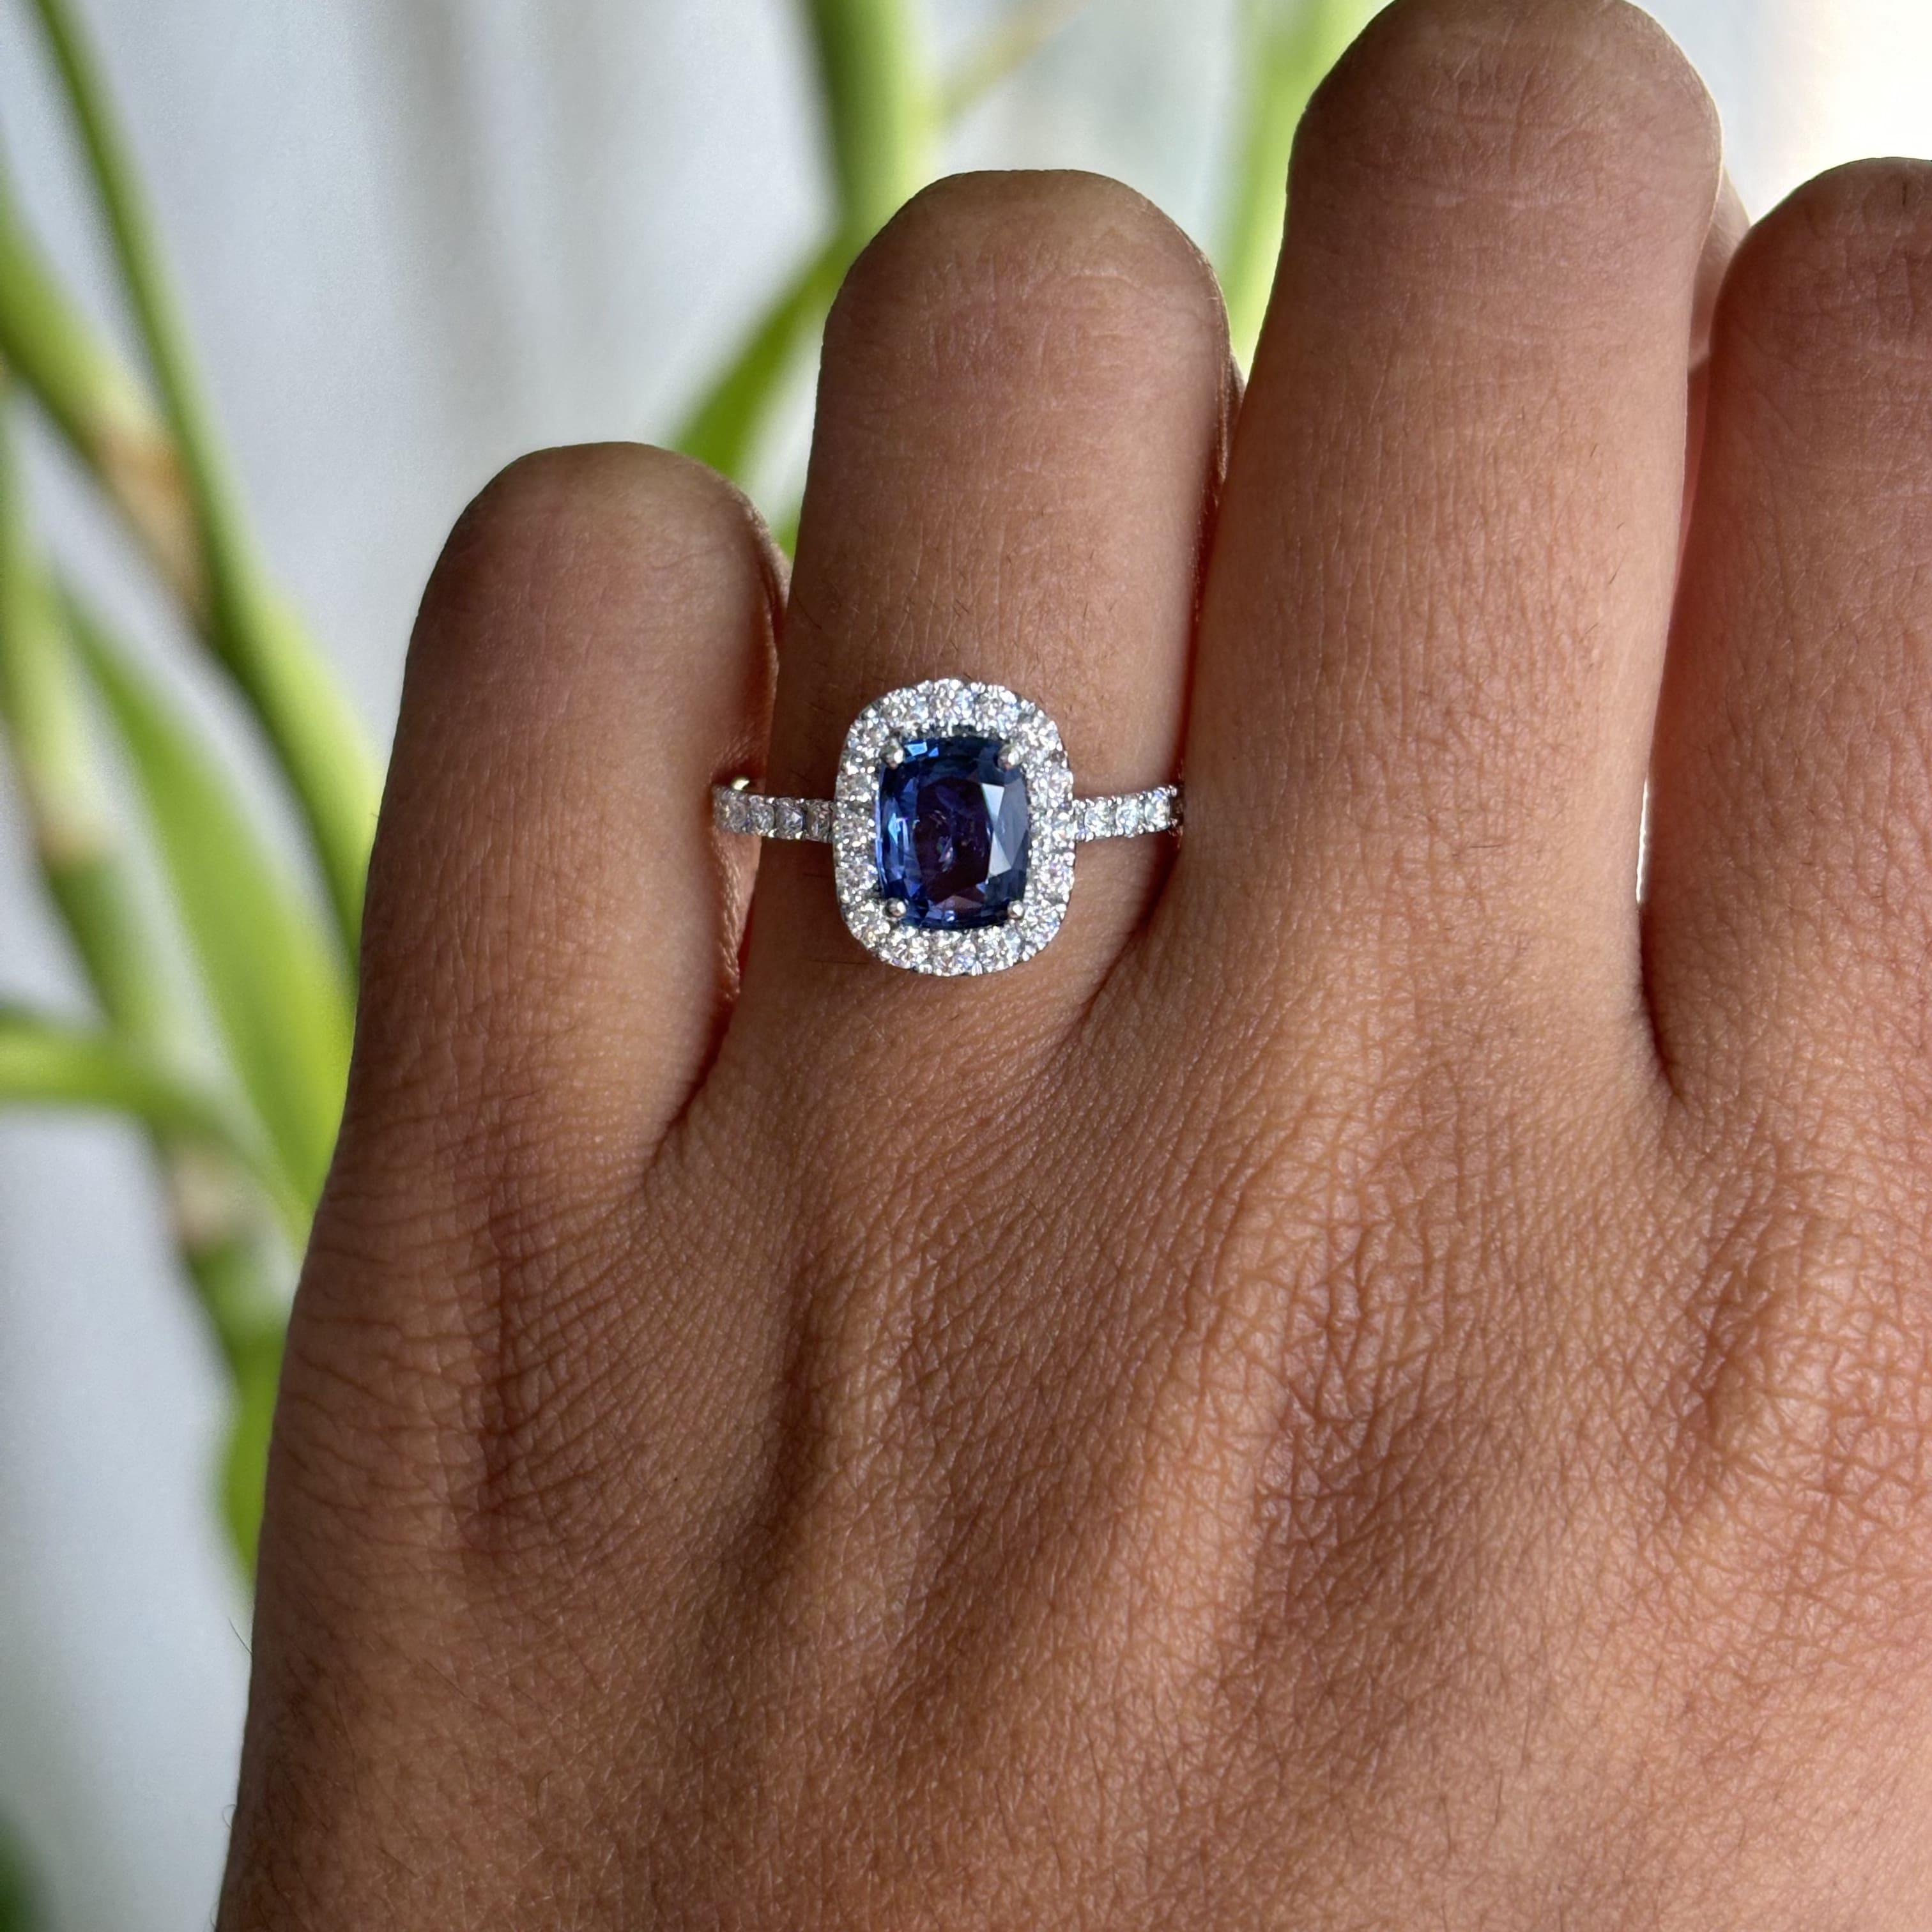 Art Deco 1.21 Carat Ceylon Blue Sapphire Ring with Halo Diamonds in 14K White Gold For Sale